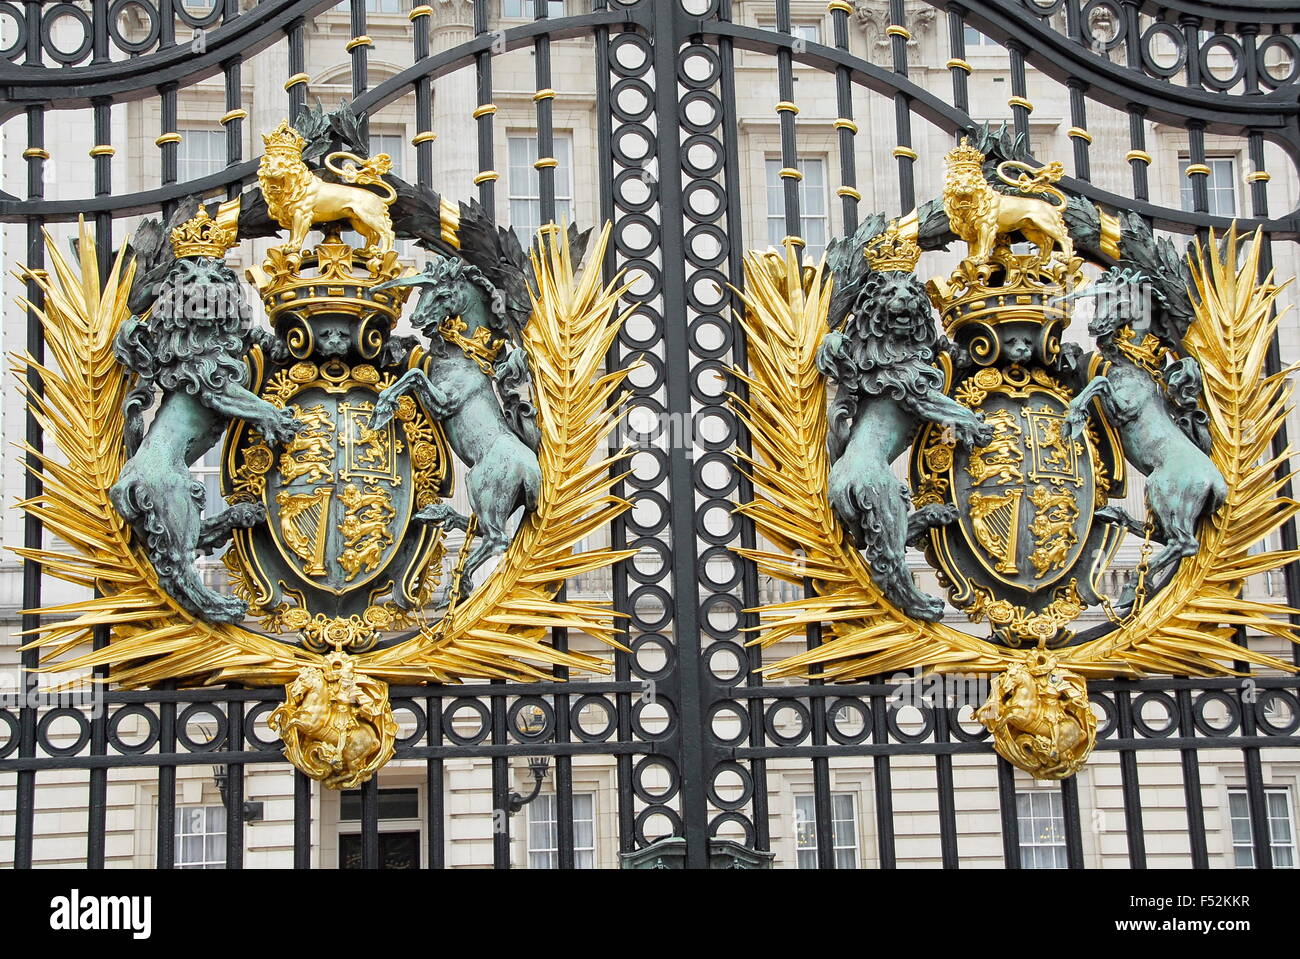 The Windsor Family crest and coat of arms on the gates to the Buckingham Palace in London, England, UK Stock Photo